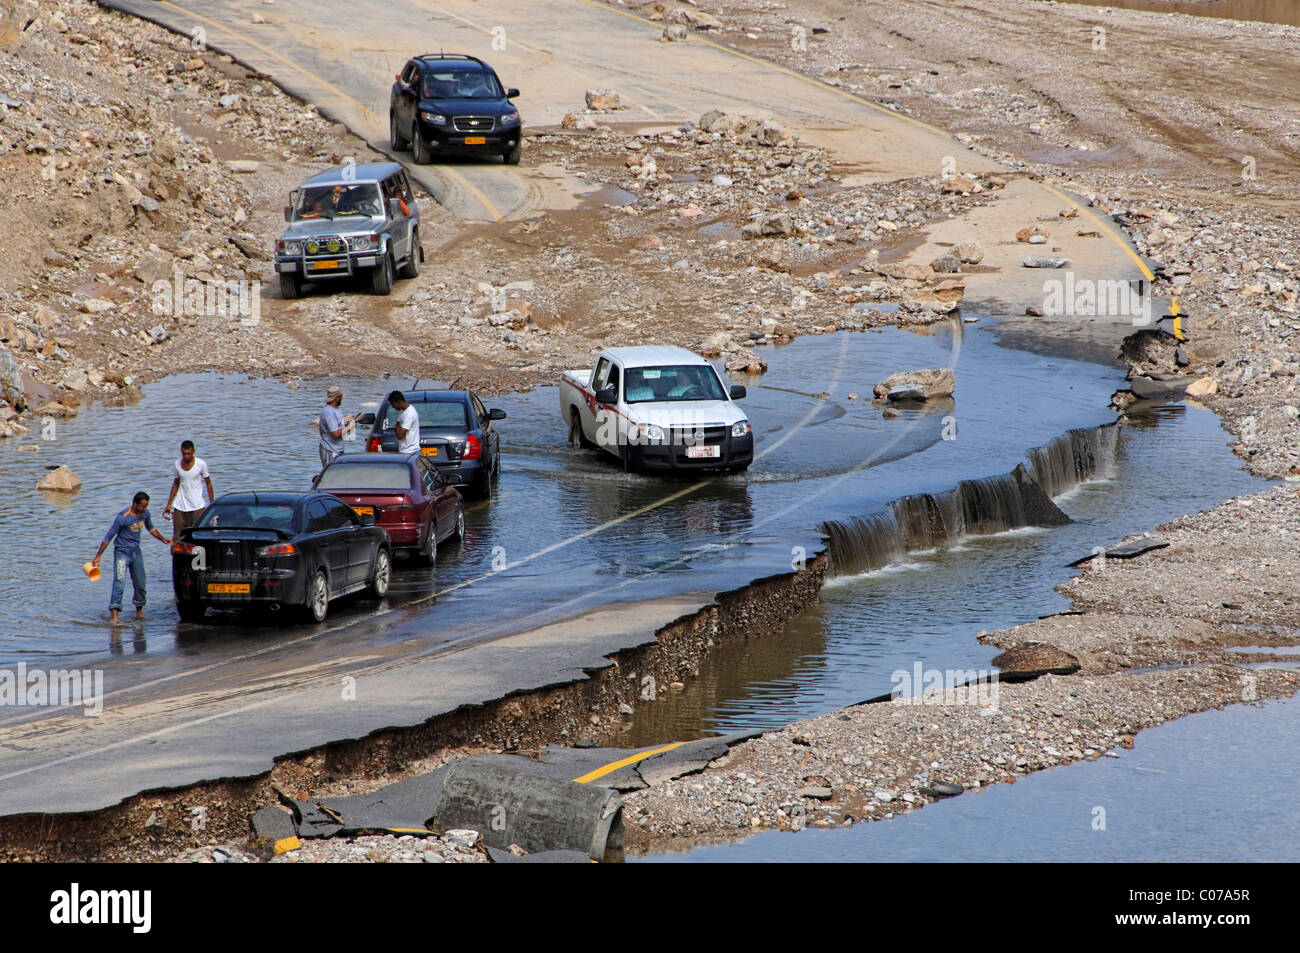 Car wash after disastrous downpour, Capital Area, Oman, Middle East Stock Photo